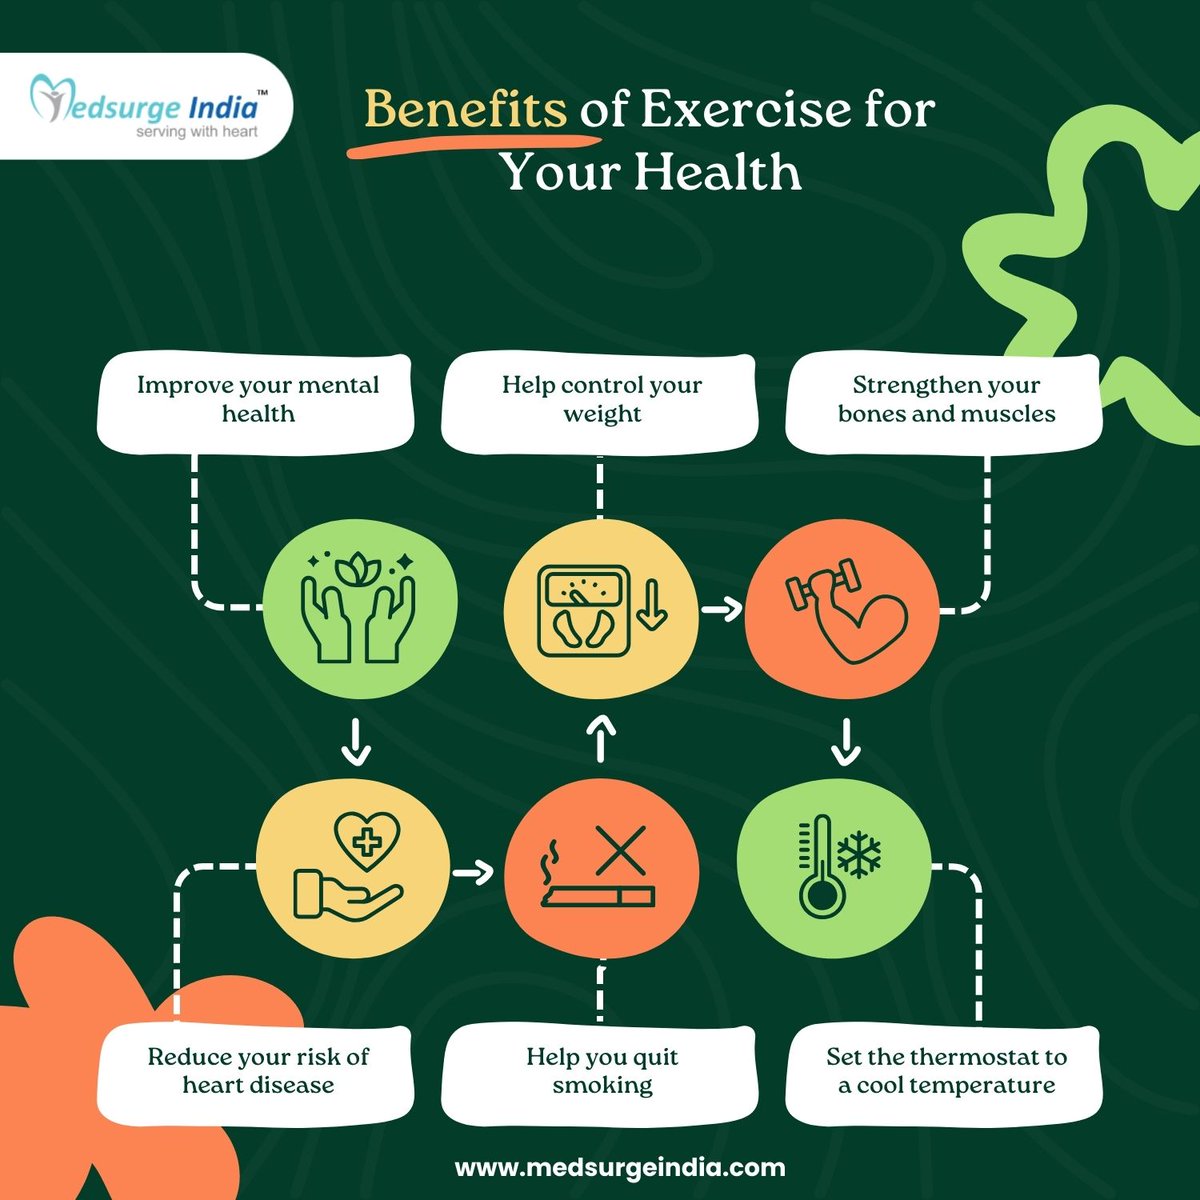 #Exercise isn't just for the body—it's a brain booster too. And yes, #yoga is considered no way lesser than #exercise nowadays! Click - shorturl.at/csPQW

#exercisetips #yogalifestyle #healthcare #FitnessGoals #HealthyLiving #ExerciseBenefits #healthyhabits #medsurgeindia